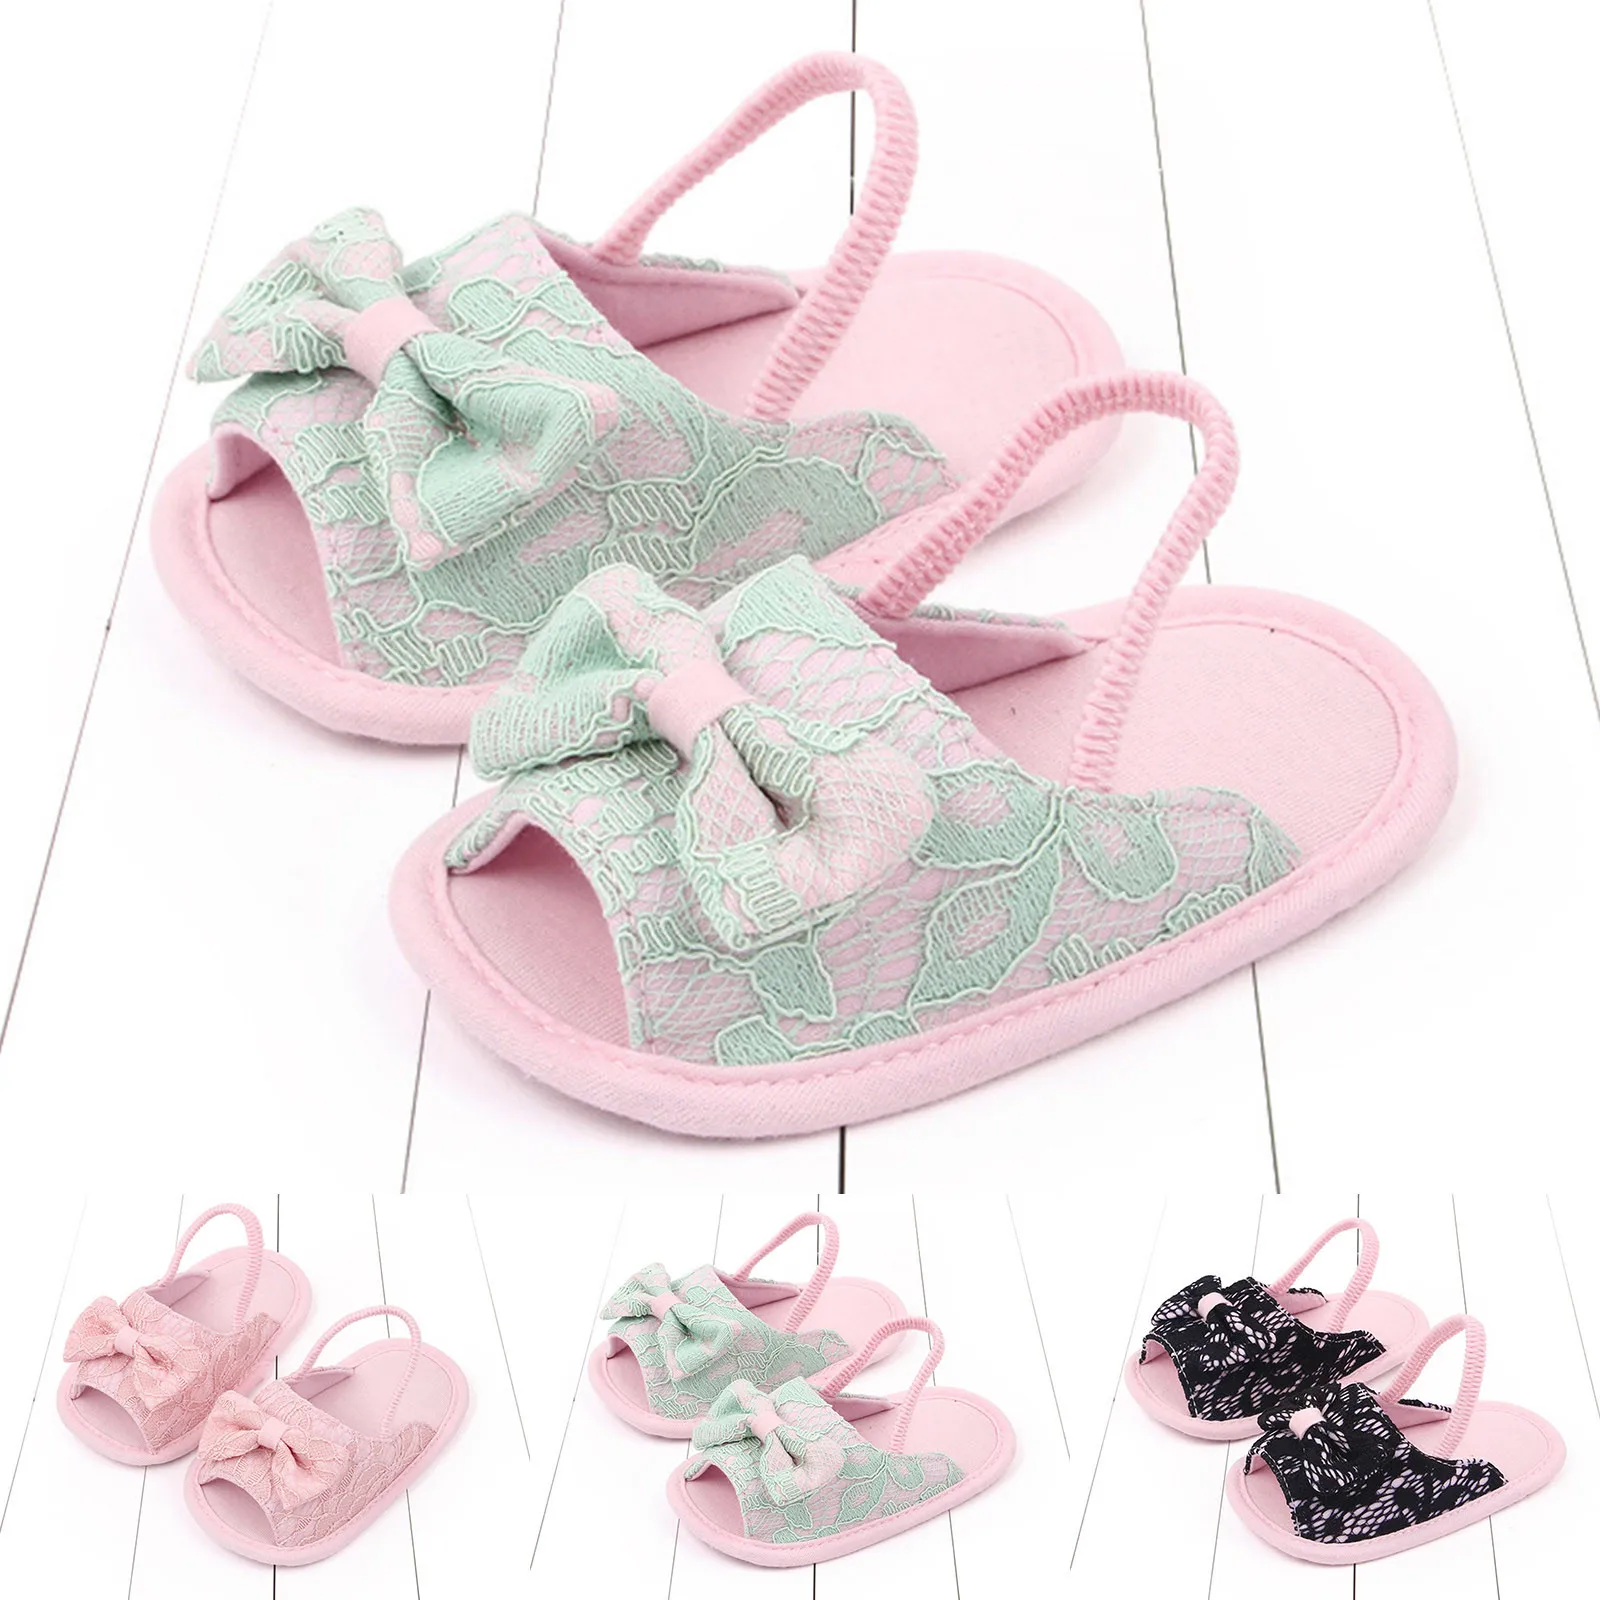 

Summer Baby Girls Bow Knot Sandals Soft Sole Flat Princess Dress Shoes Infant Non-Slip Toddler First Walkers Footwear sandalias